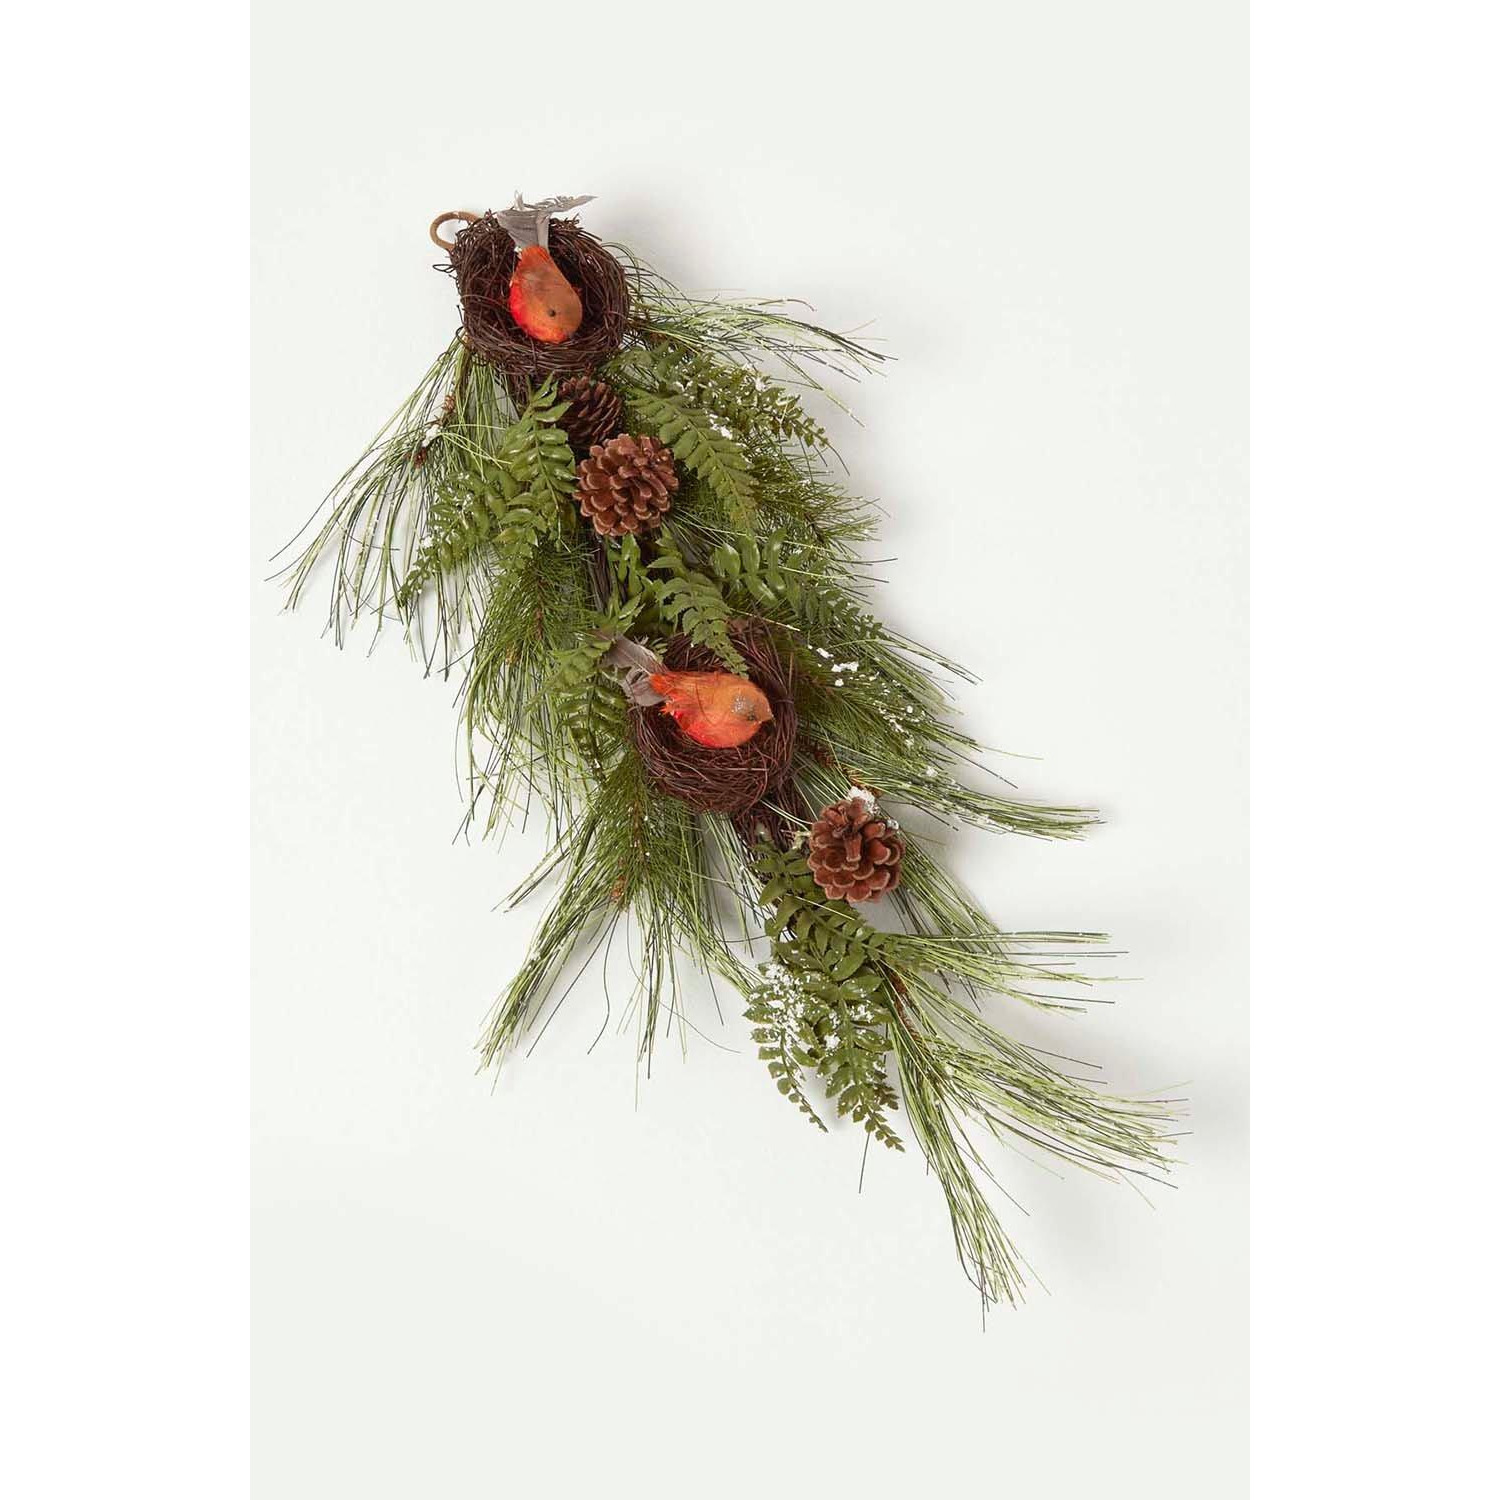 Artificial Replica Pine Branch Christmas Swag with Robins Nests - image 1